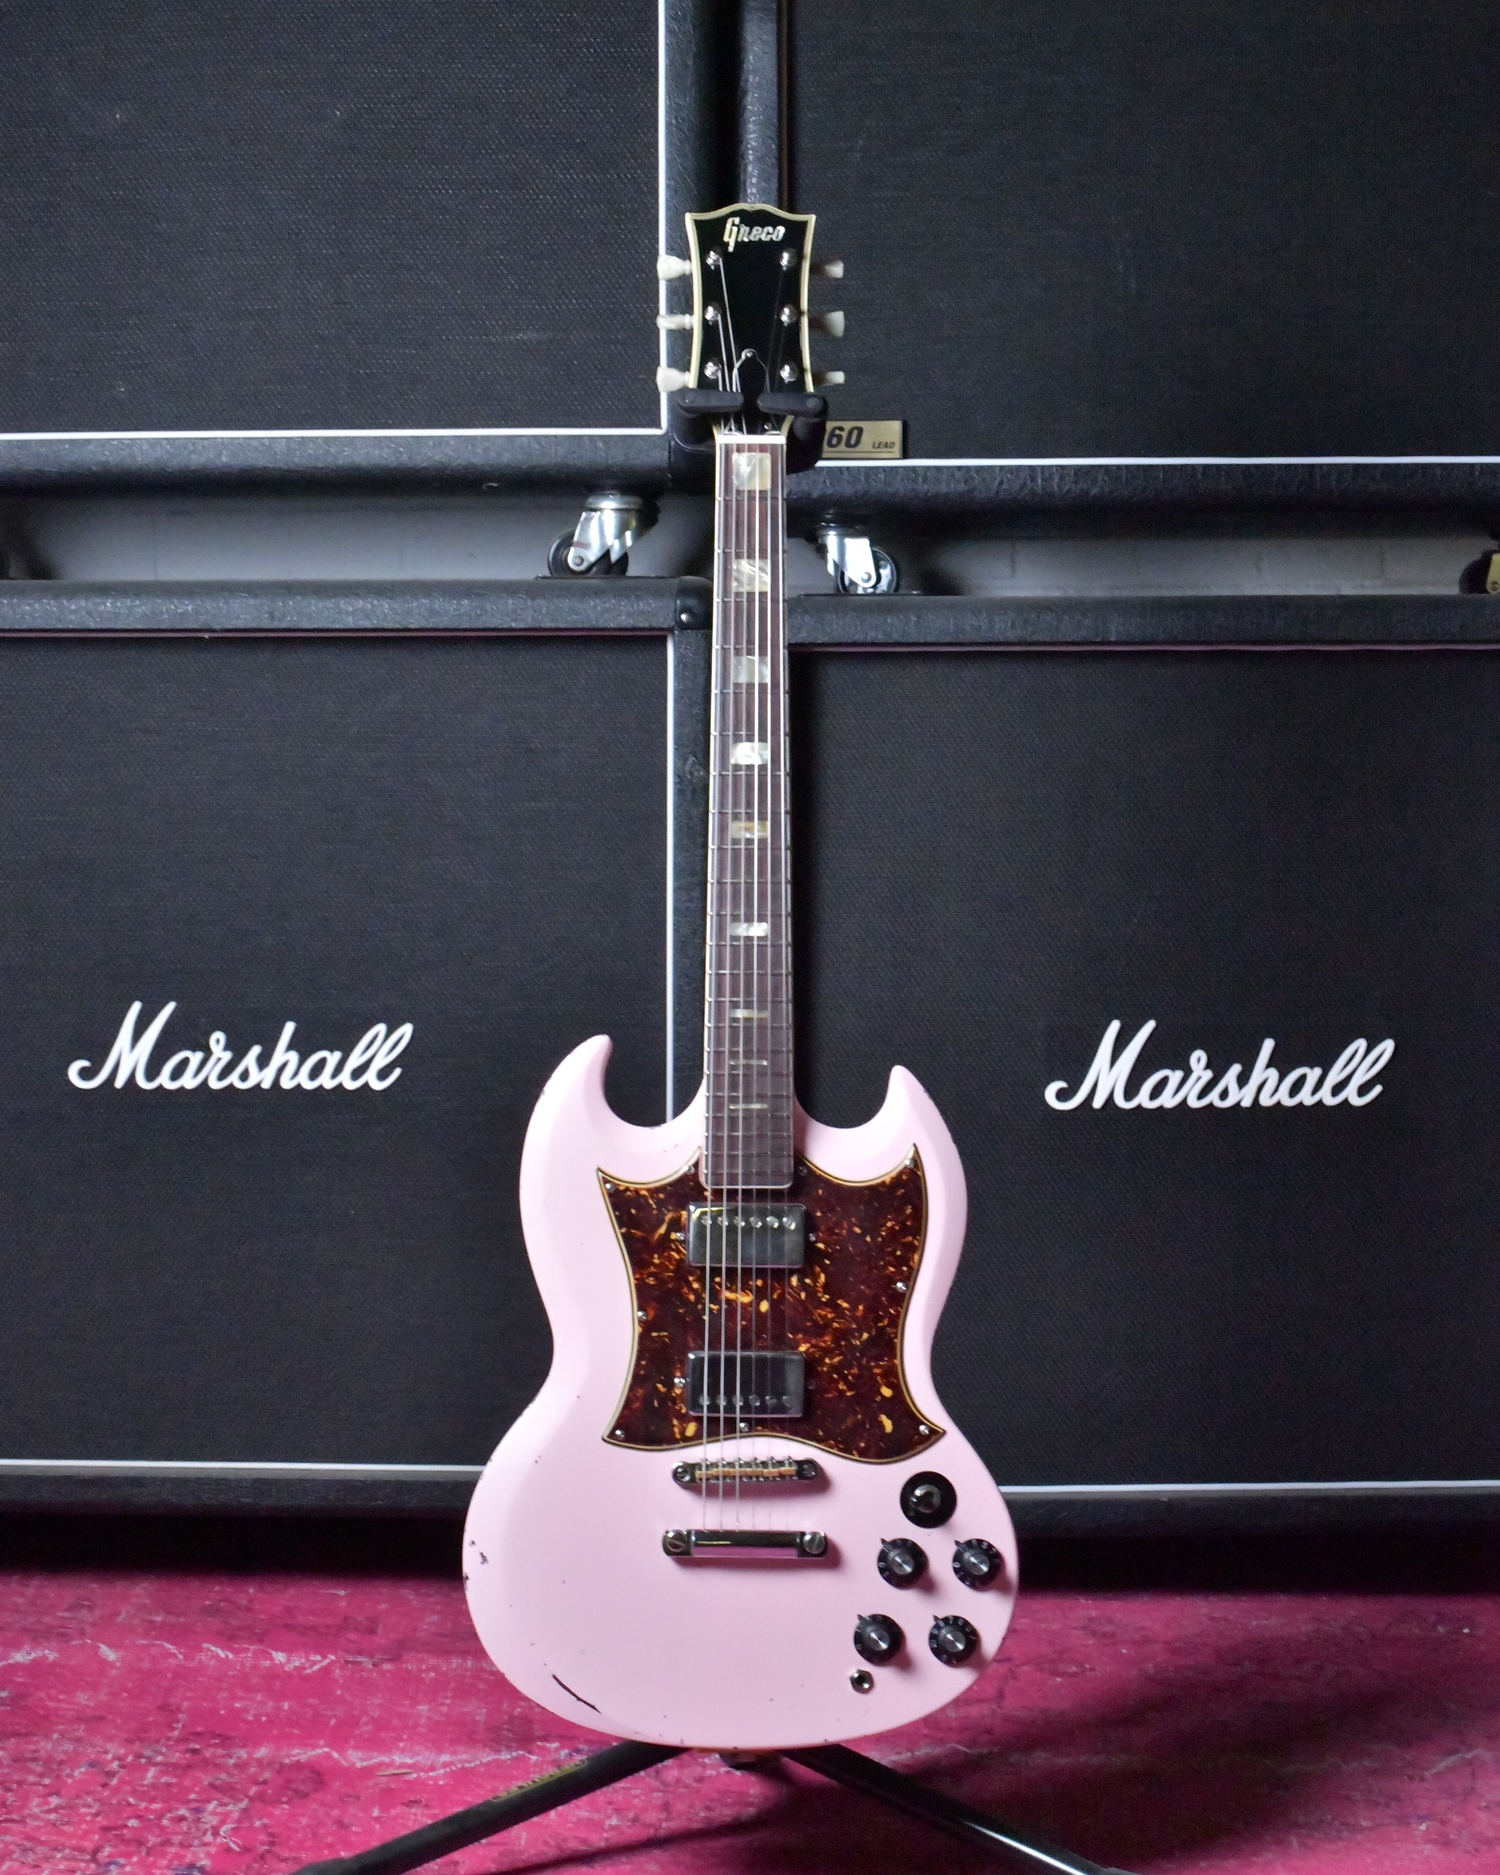 Greco 1975 SG-360 Made in Japan Shell Pink Nitro Relic